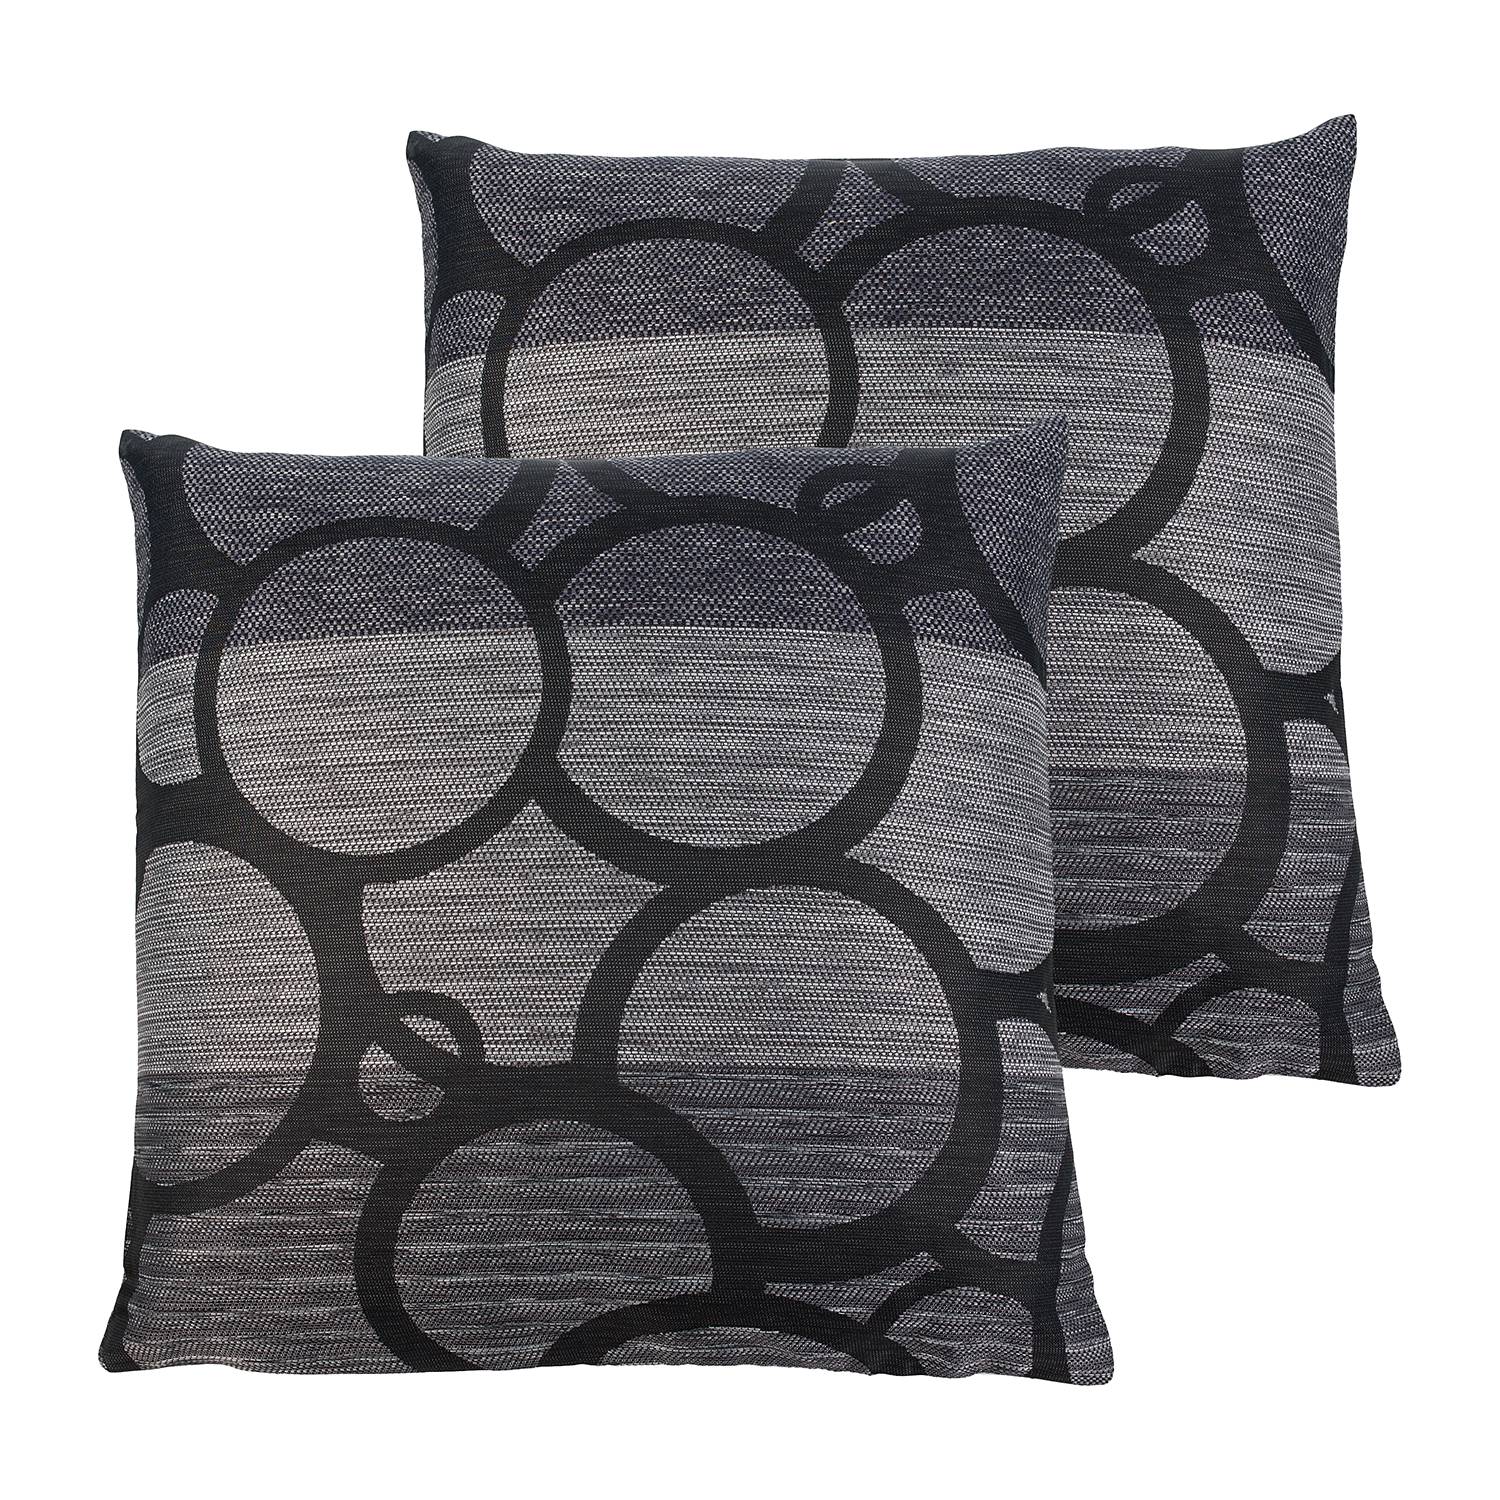 Image of Housses de coussin Conelly 000000001000156163